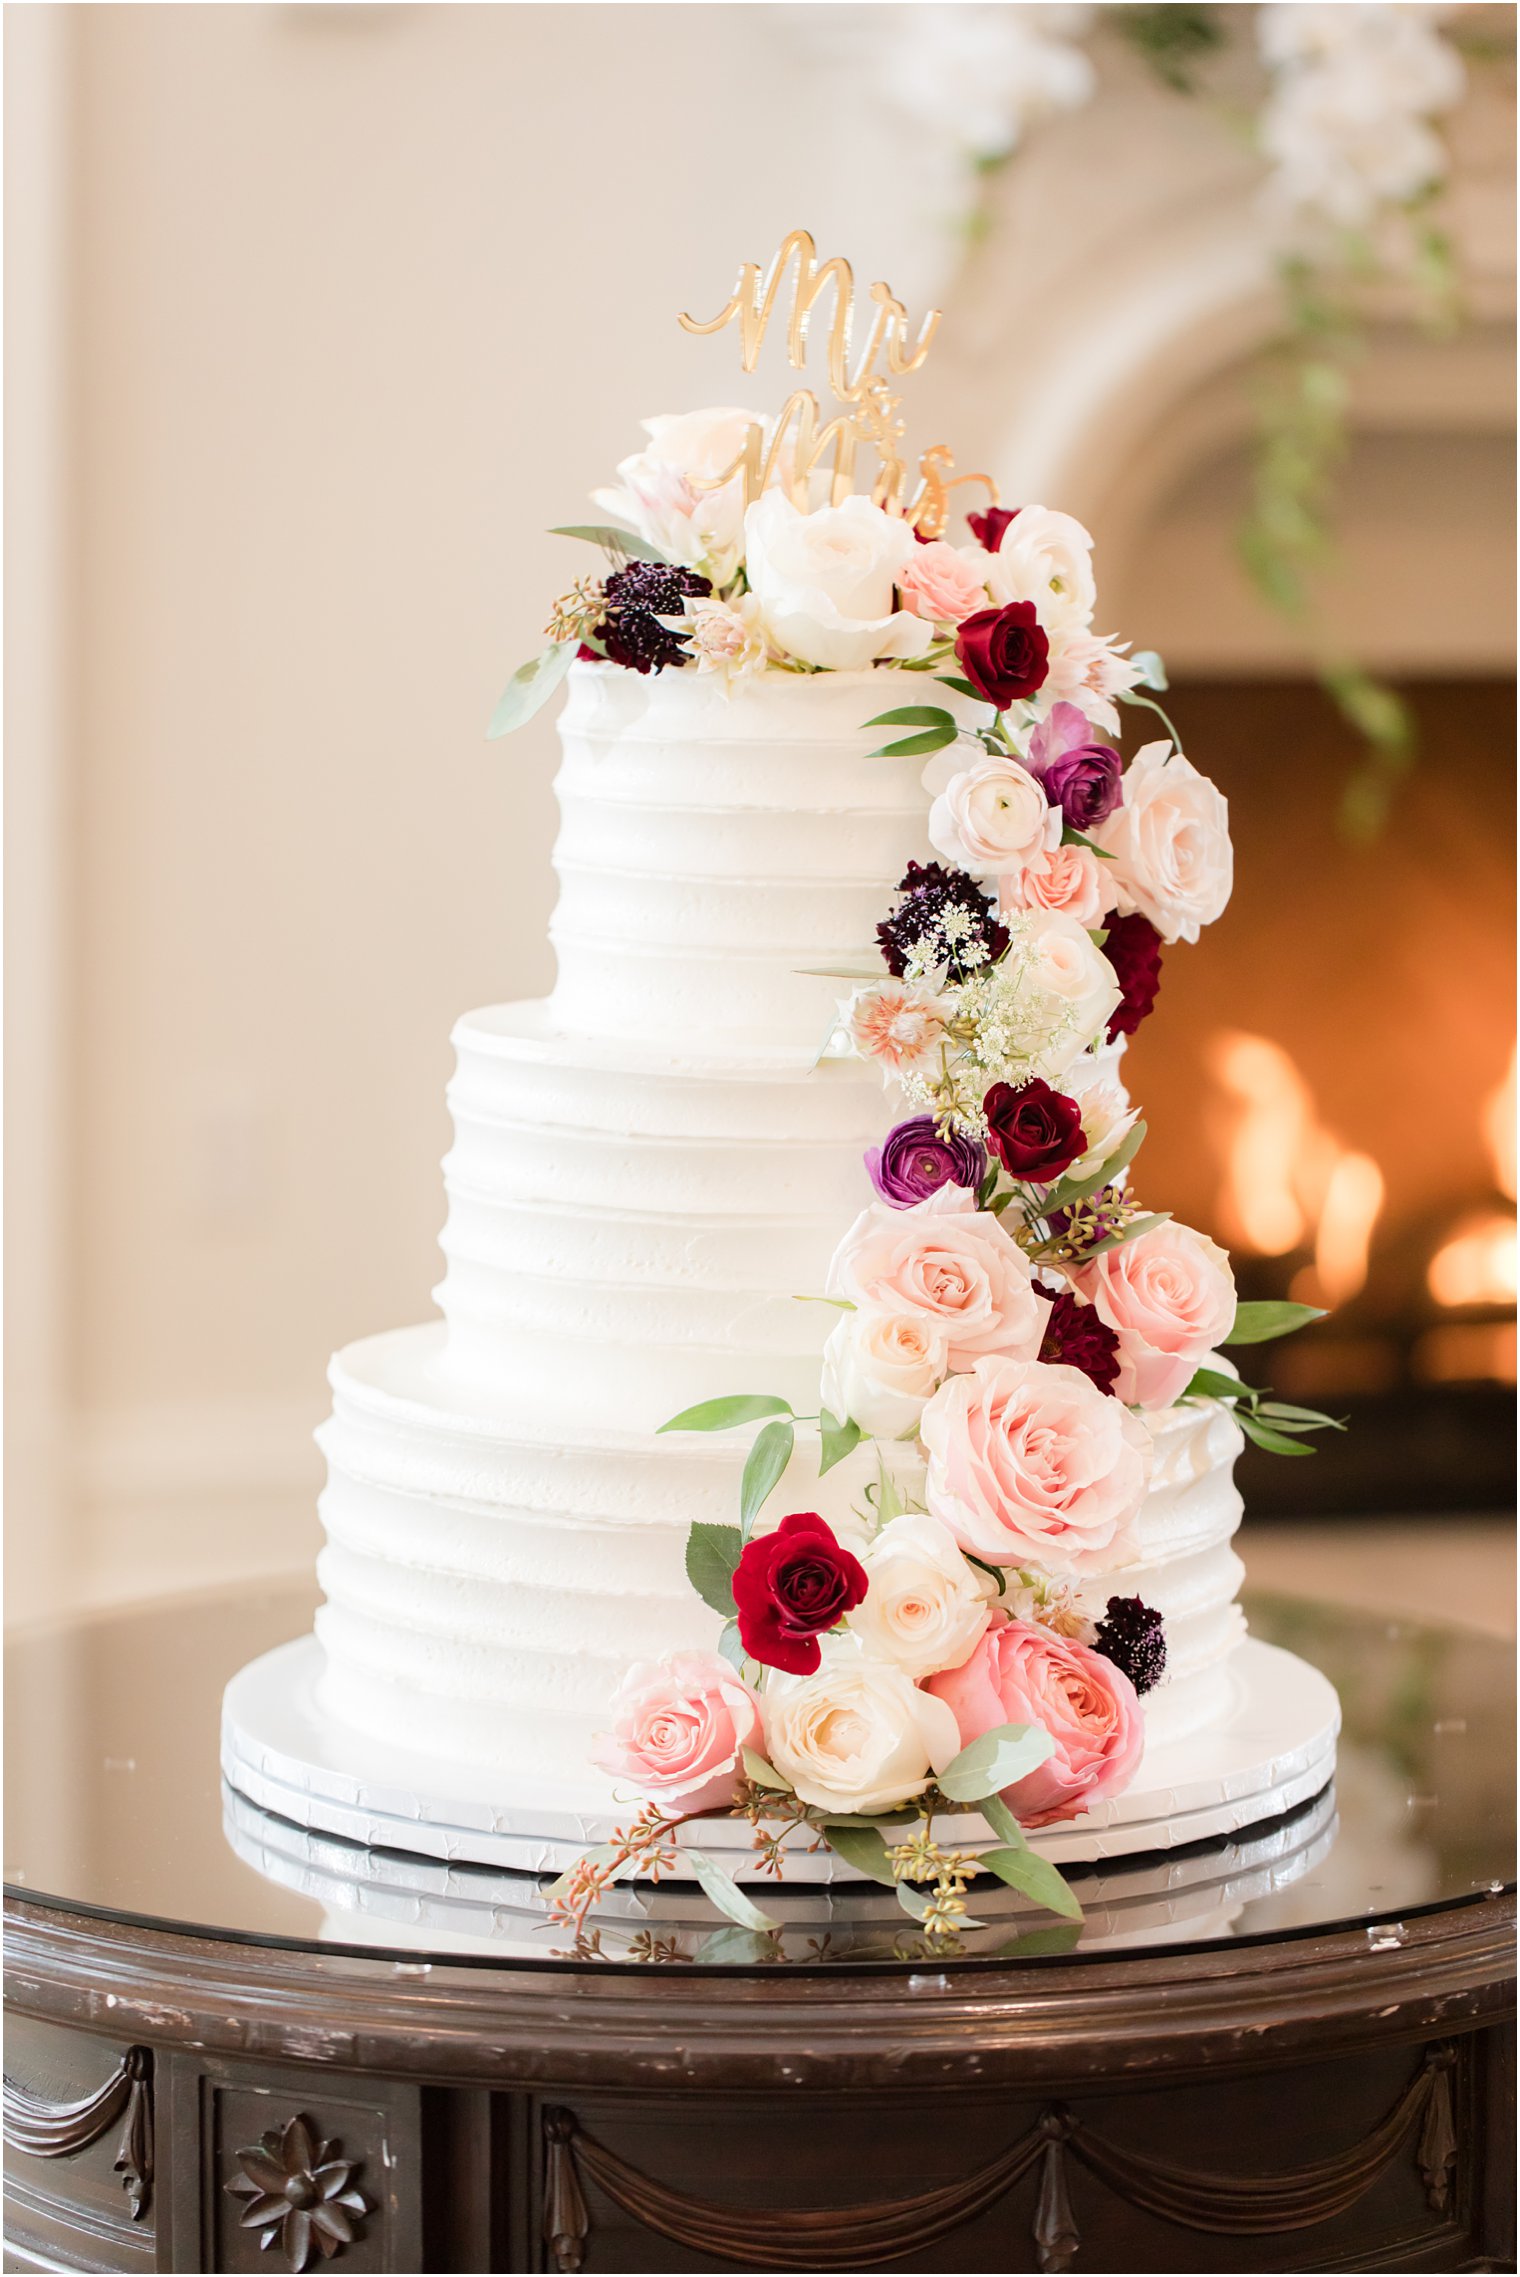 tiered wedding cake with floral details photographed by Idalia Photography